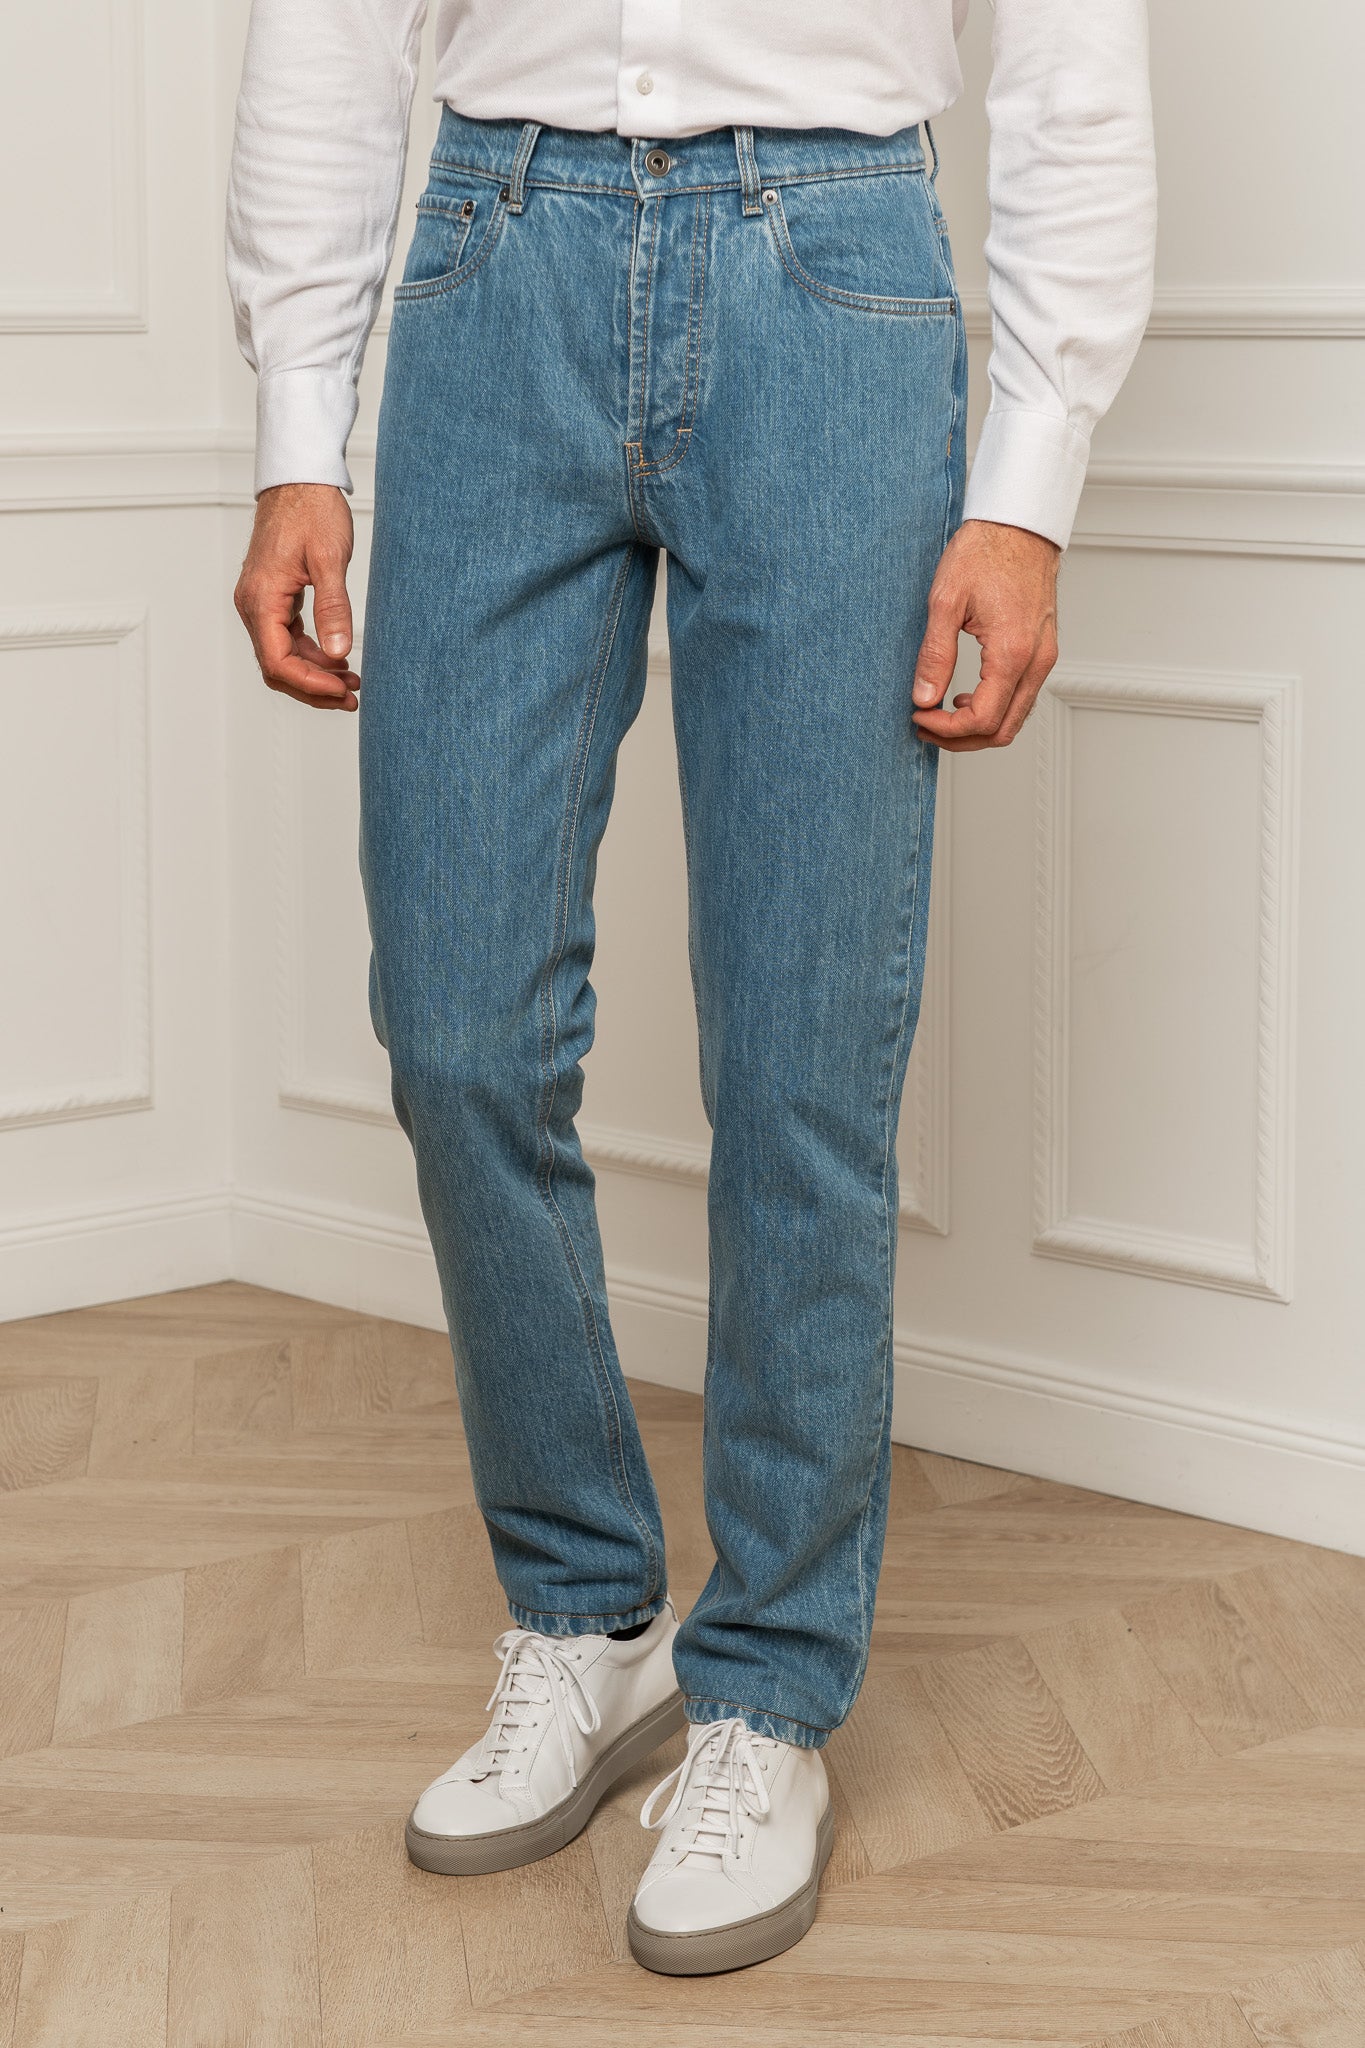 Light blue bleached jeans - Candiani cotton - Made in Italy